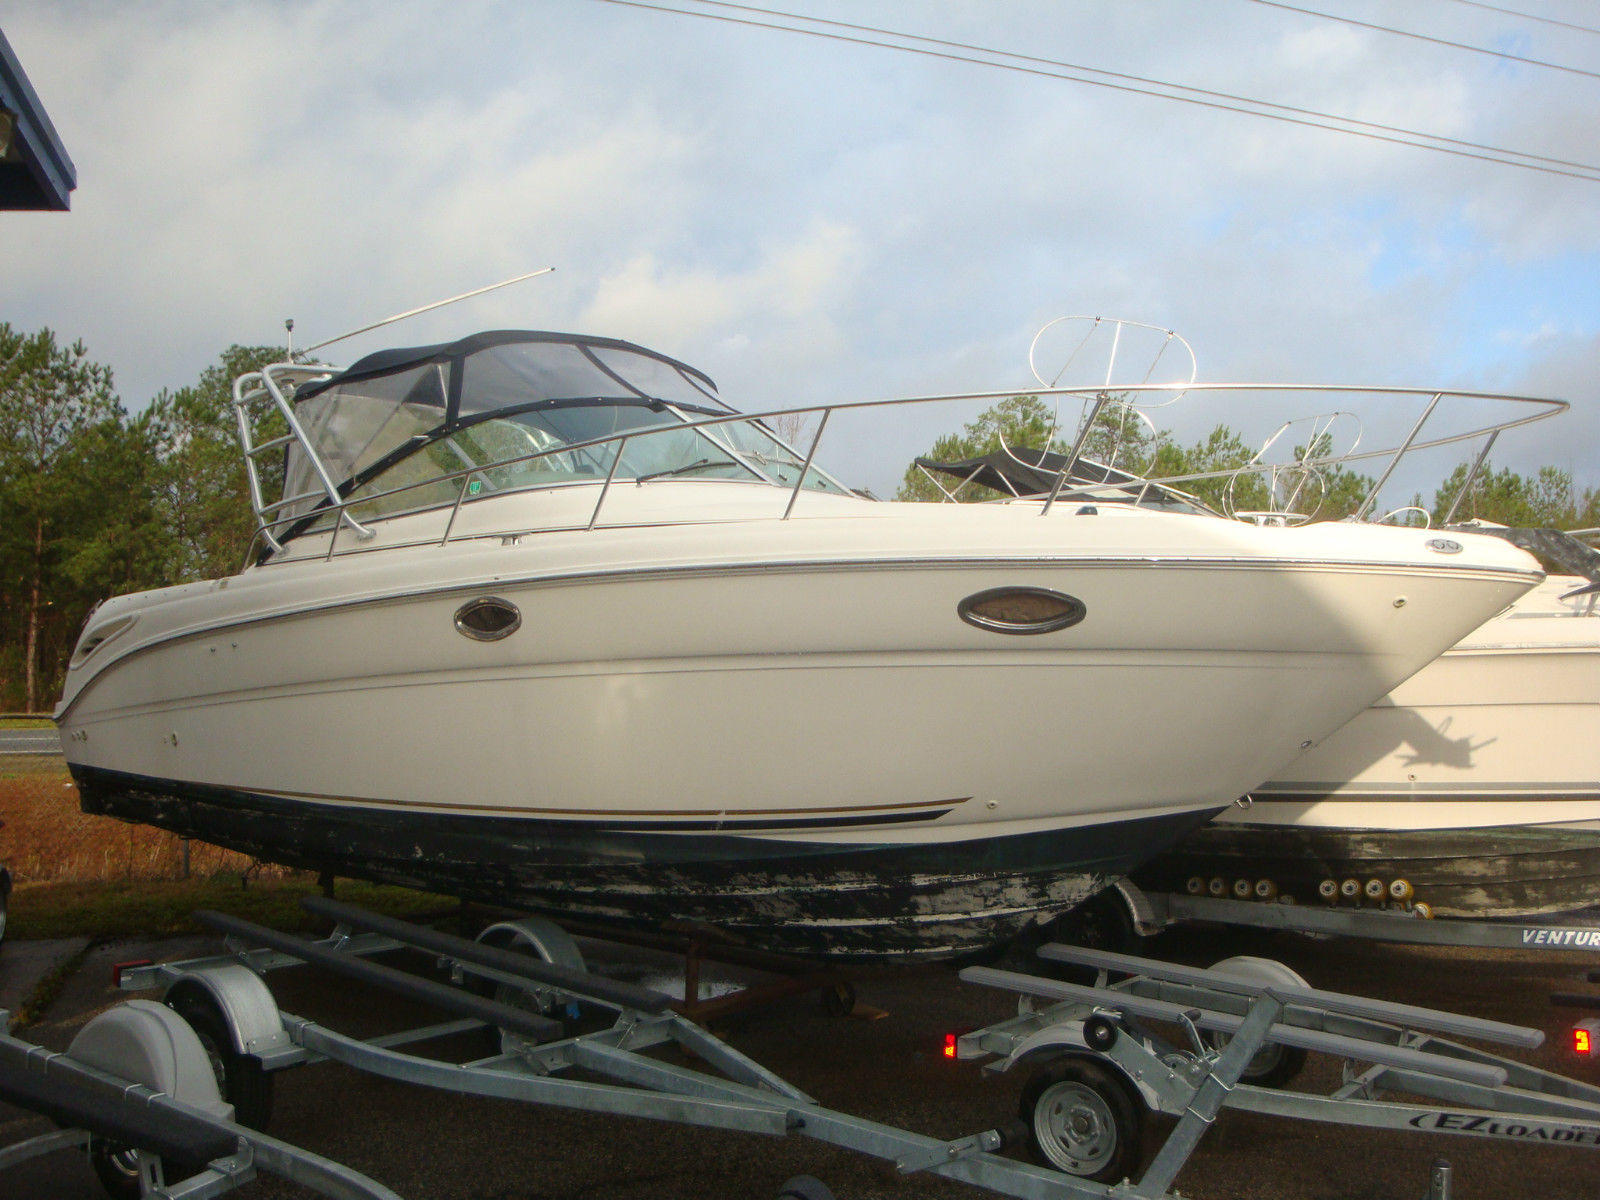 Sea Ray 290 Amberjack boat for sale from USA